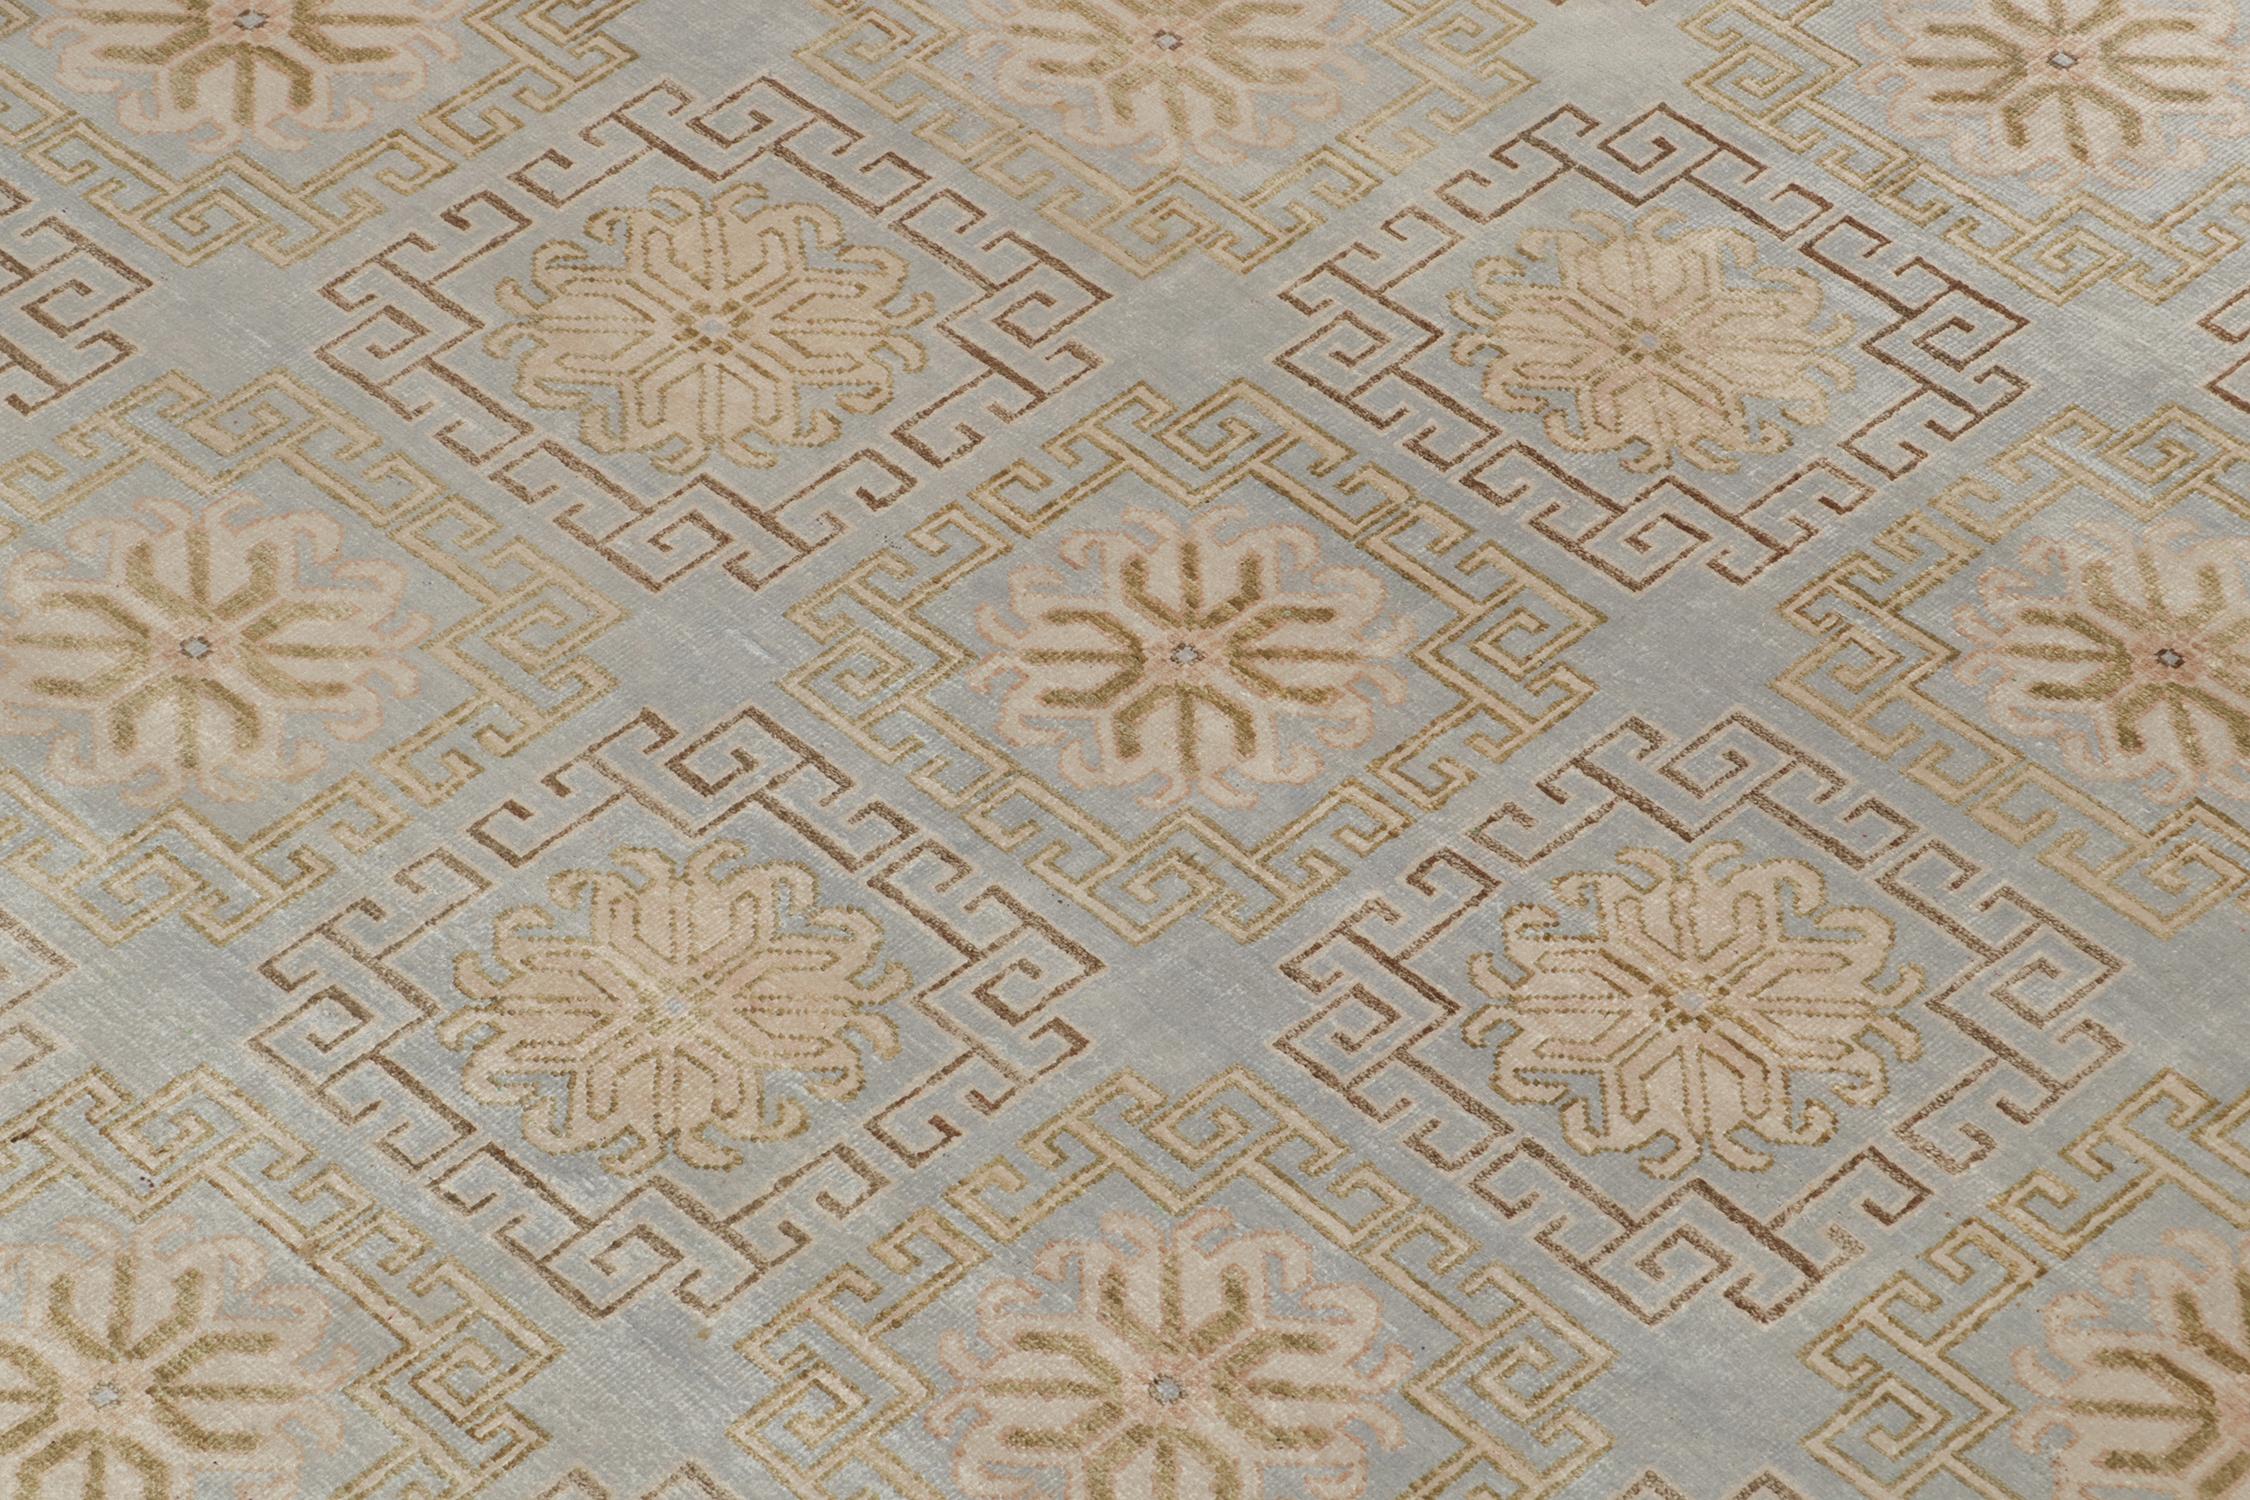 Contemporary Rug & Kilim’s Khotan Style Rug with Blue & Beige-Brown Medallion Patterns For Sale